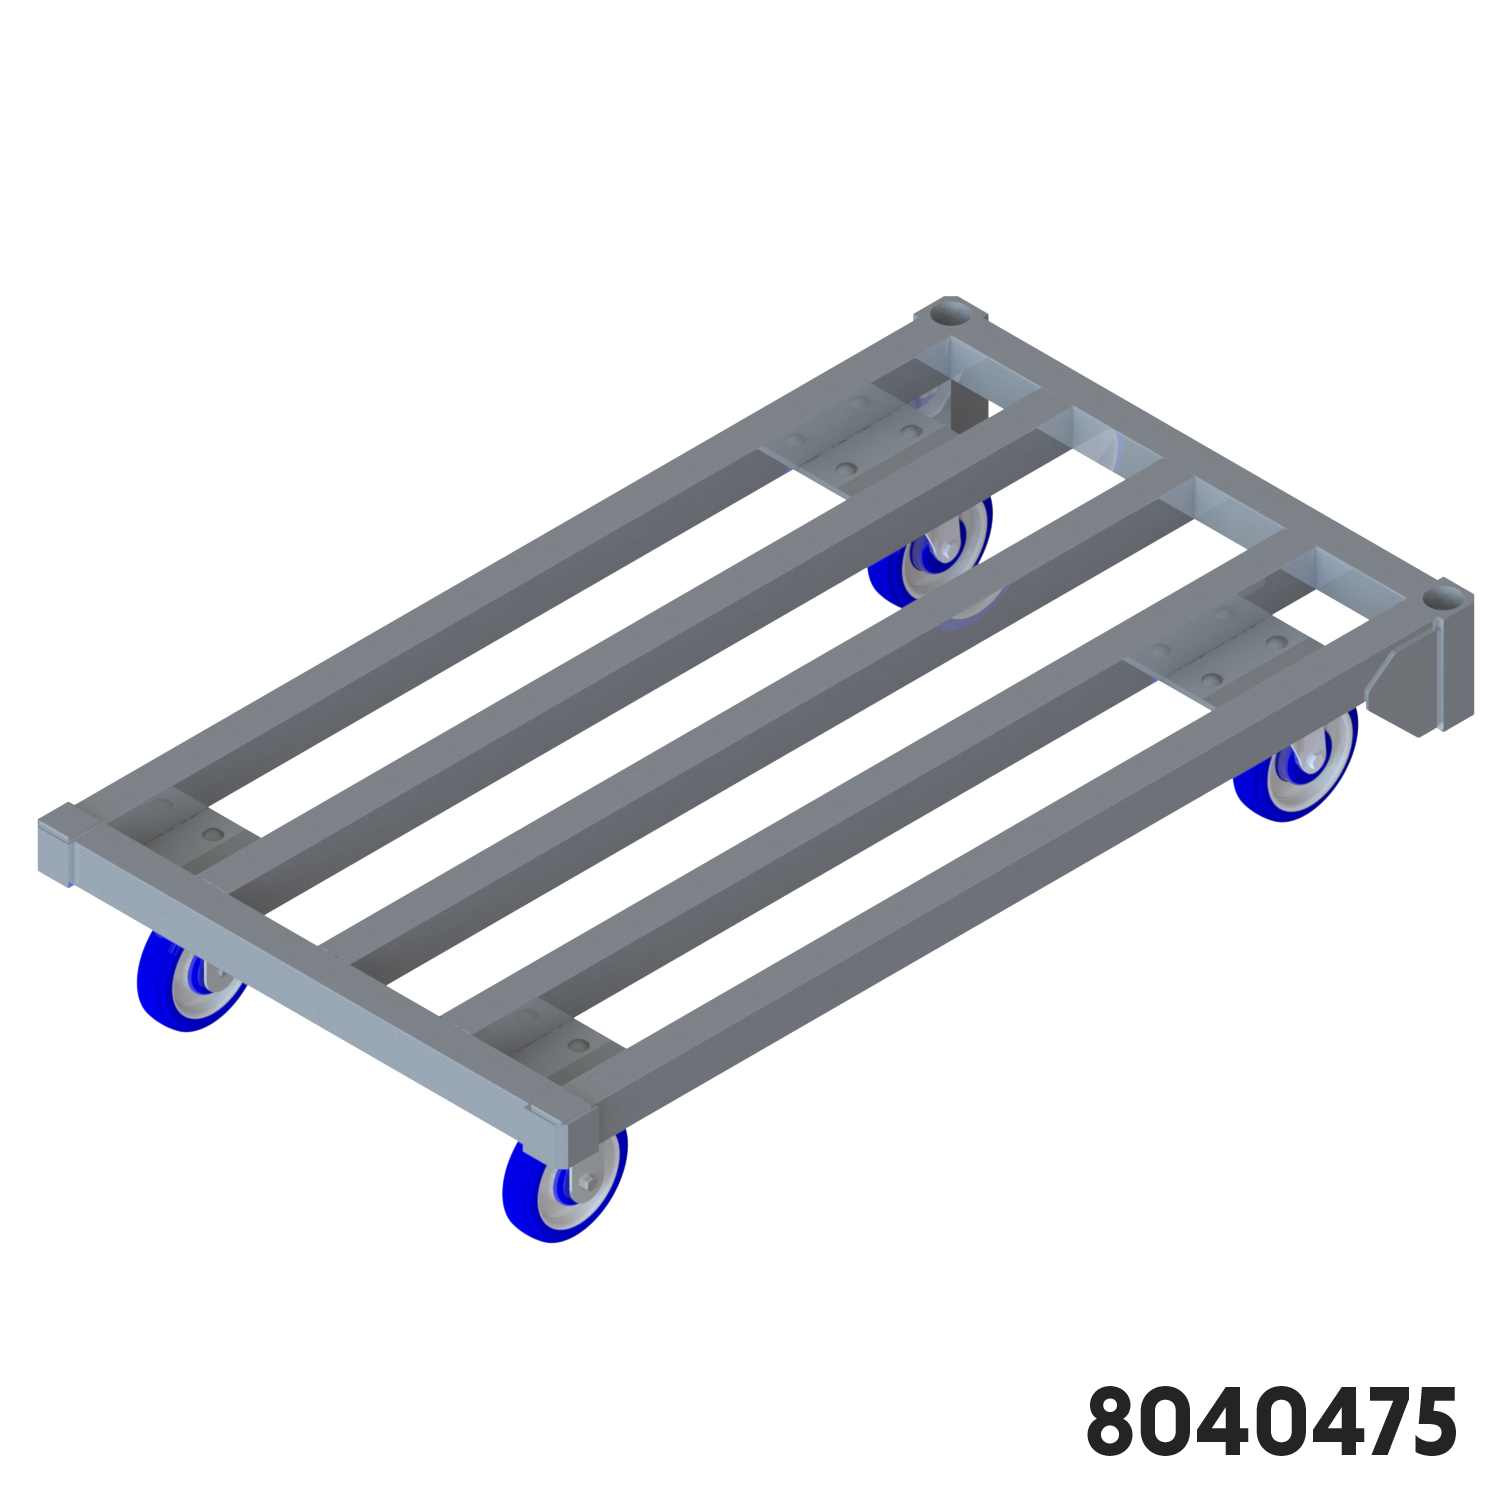 sanitary aluminum cart can be used in all departments to transport or store dry goods and perishables.